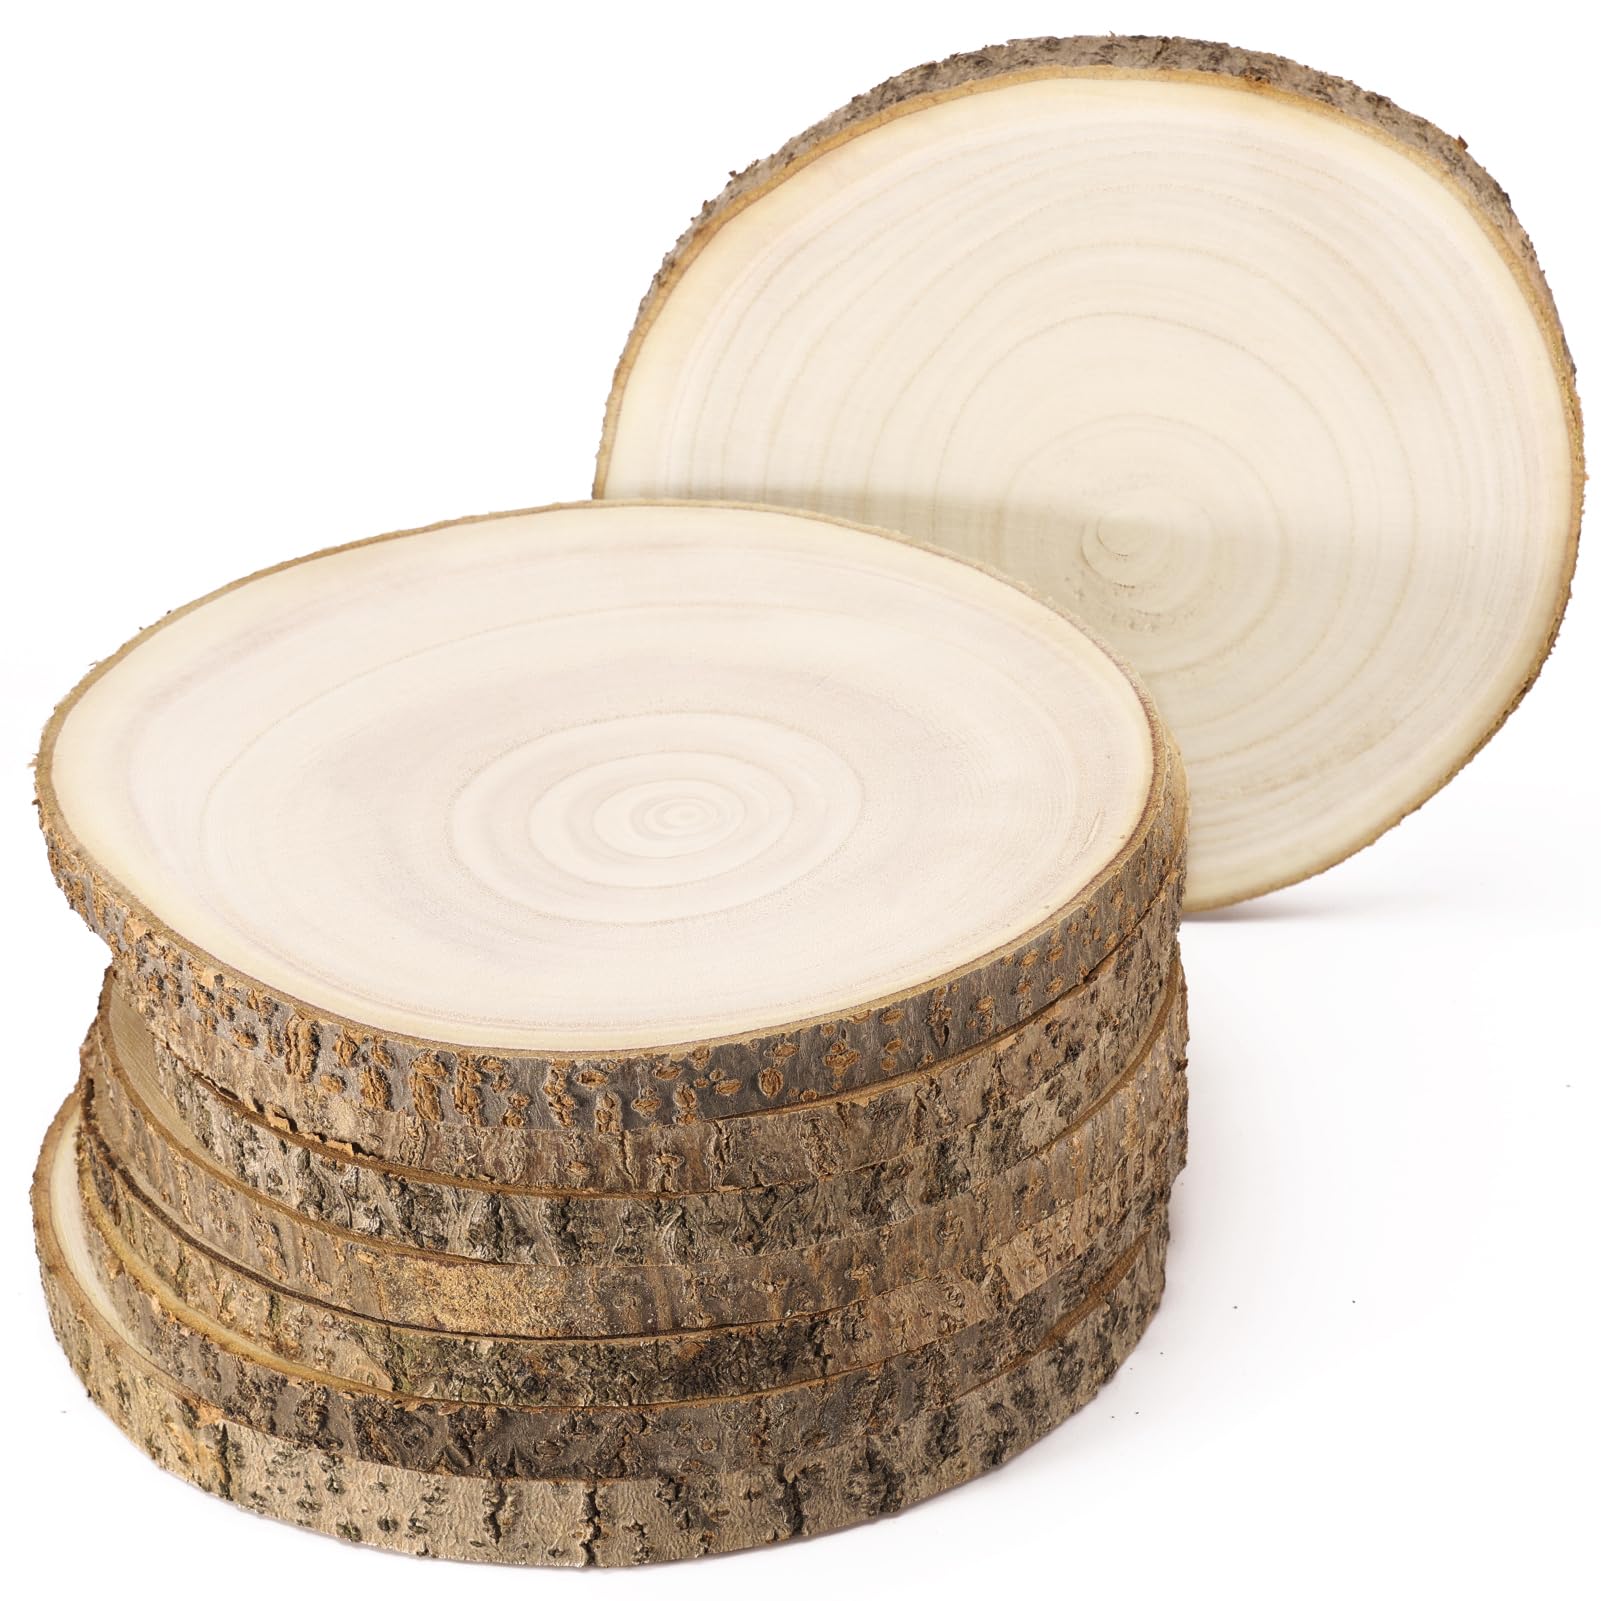  Pllieay 6 Pack 12-13 Inch Round Nature Wood Slice, Wood Cookies Wooden  Centerpieces for Tables, Weddings, Table Centerpieces and Other DIY Projects